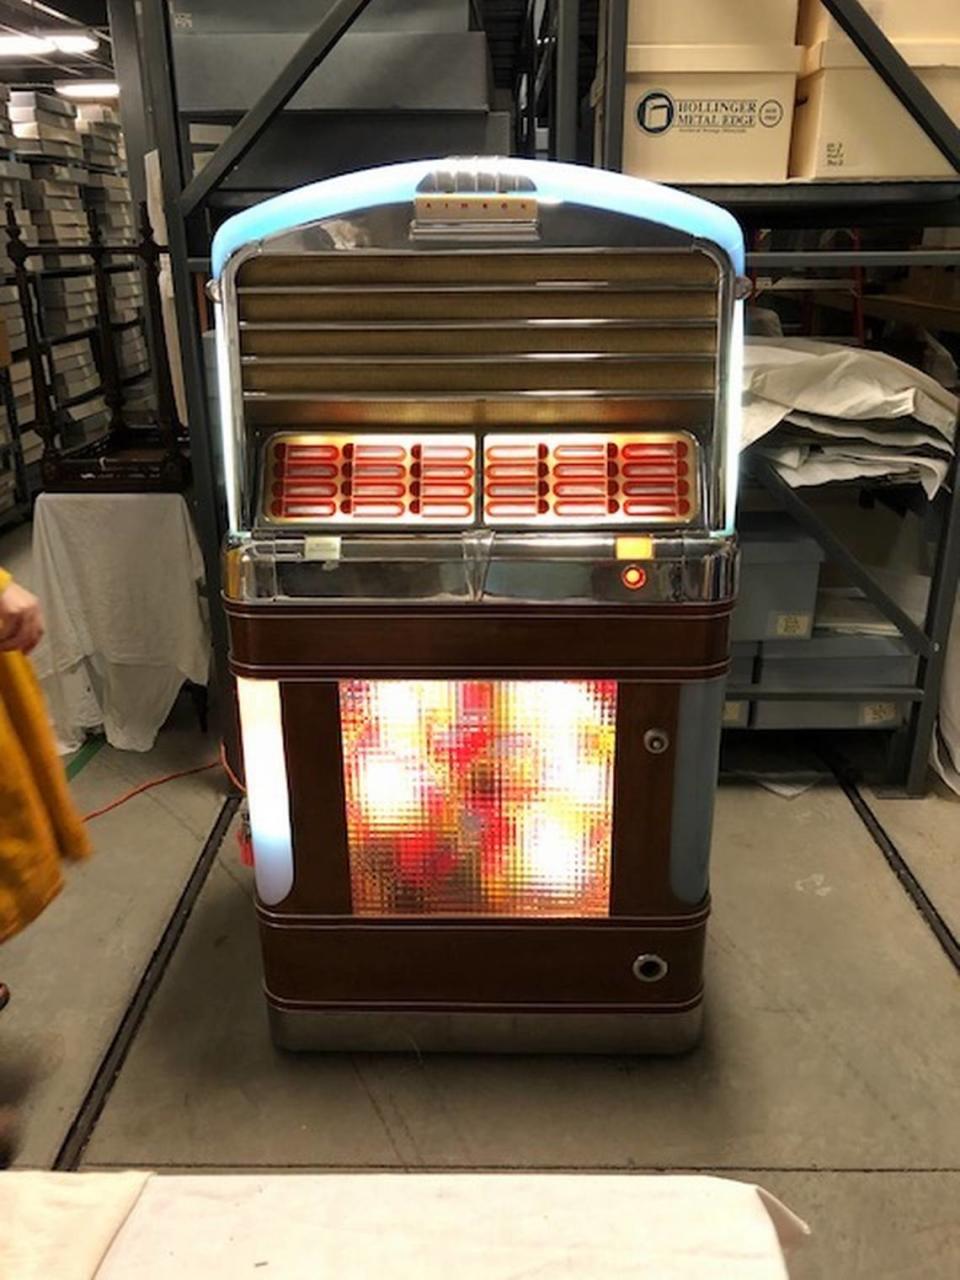 This Aireon Jukebox is in storage at the Kansas City Museum. It is expected to go on display to the public this fall.